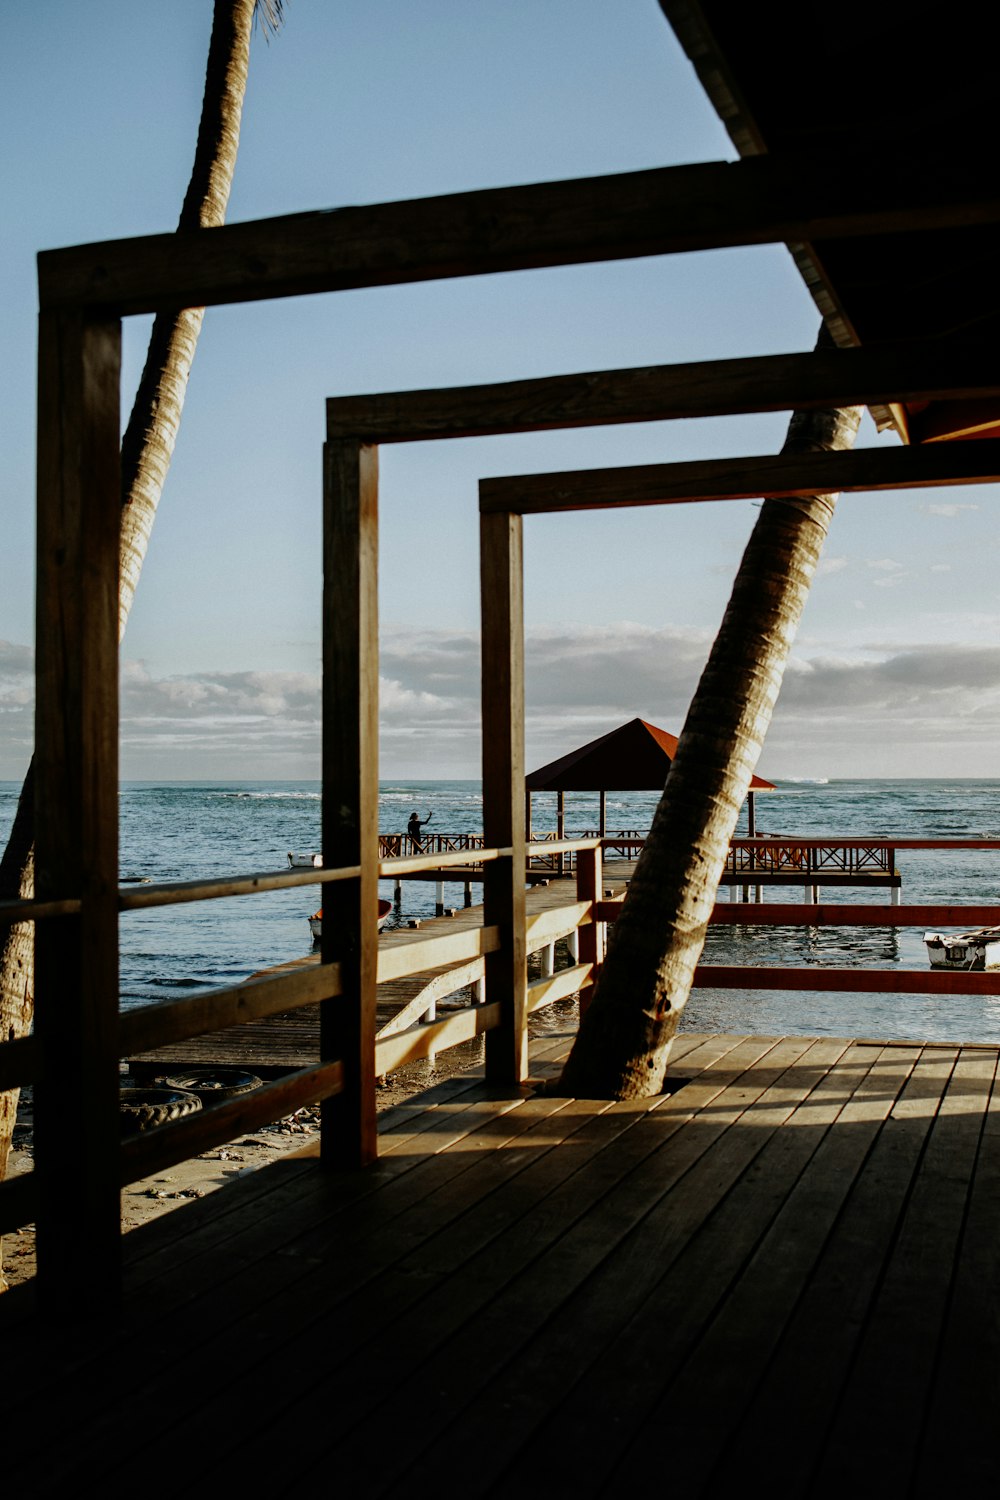 a view of the ocean from a wooden pier